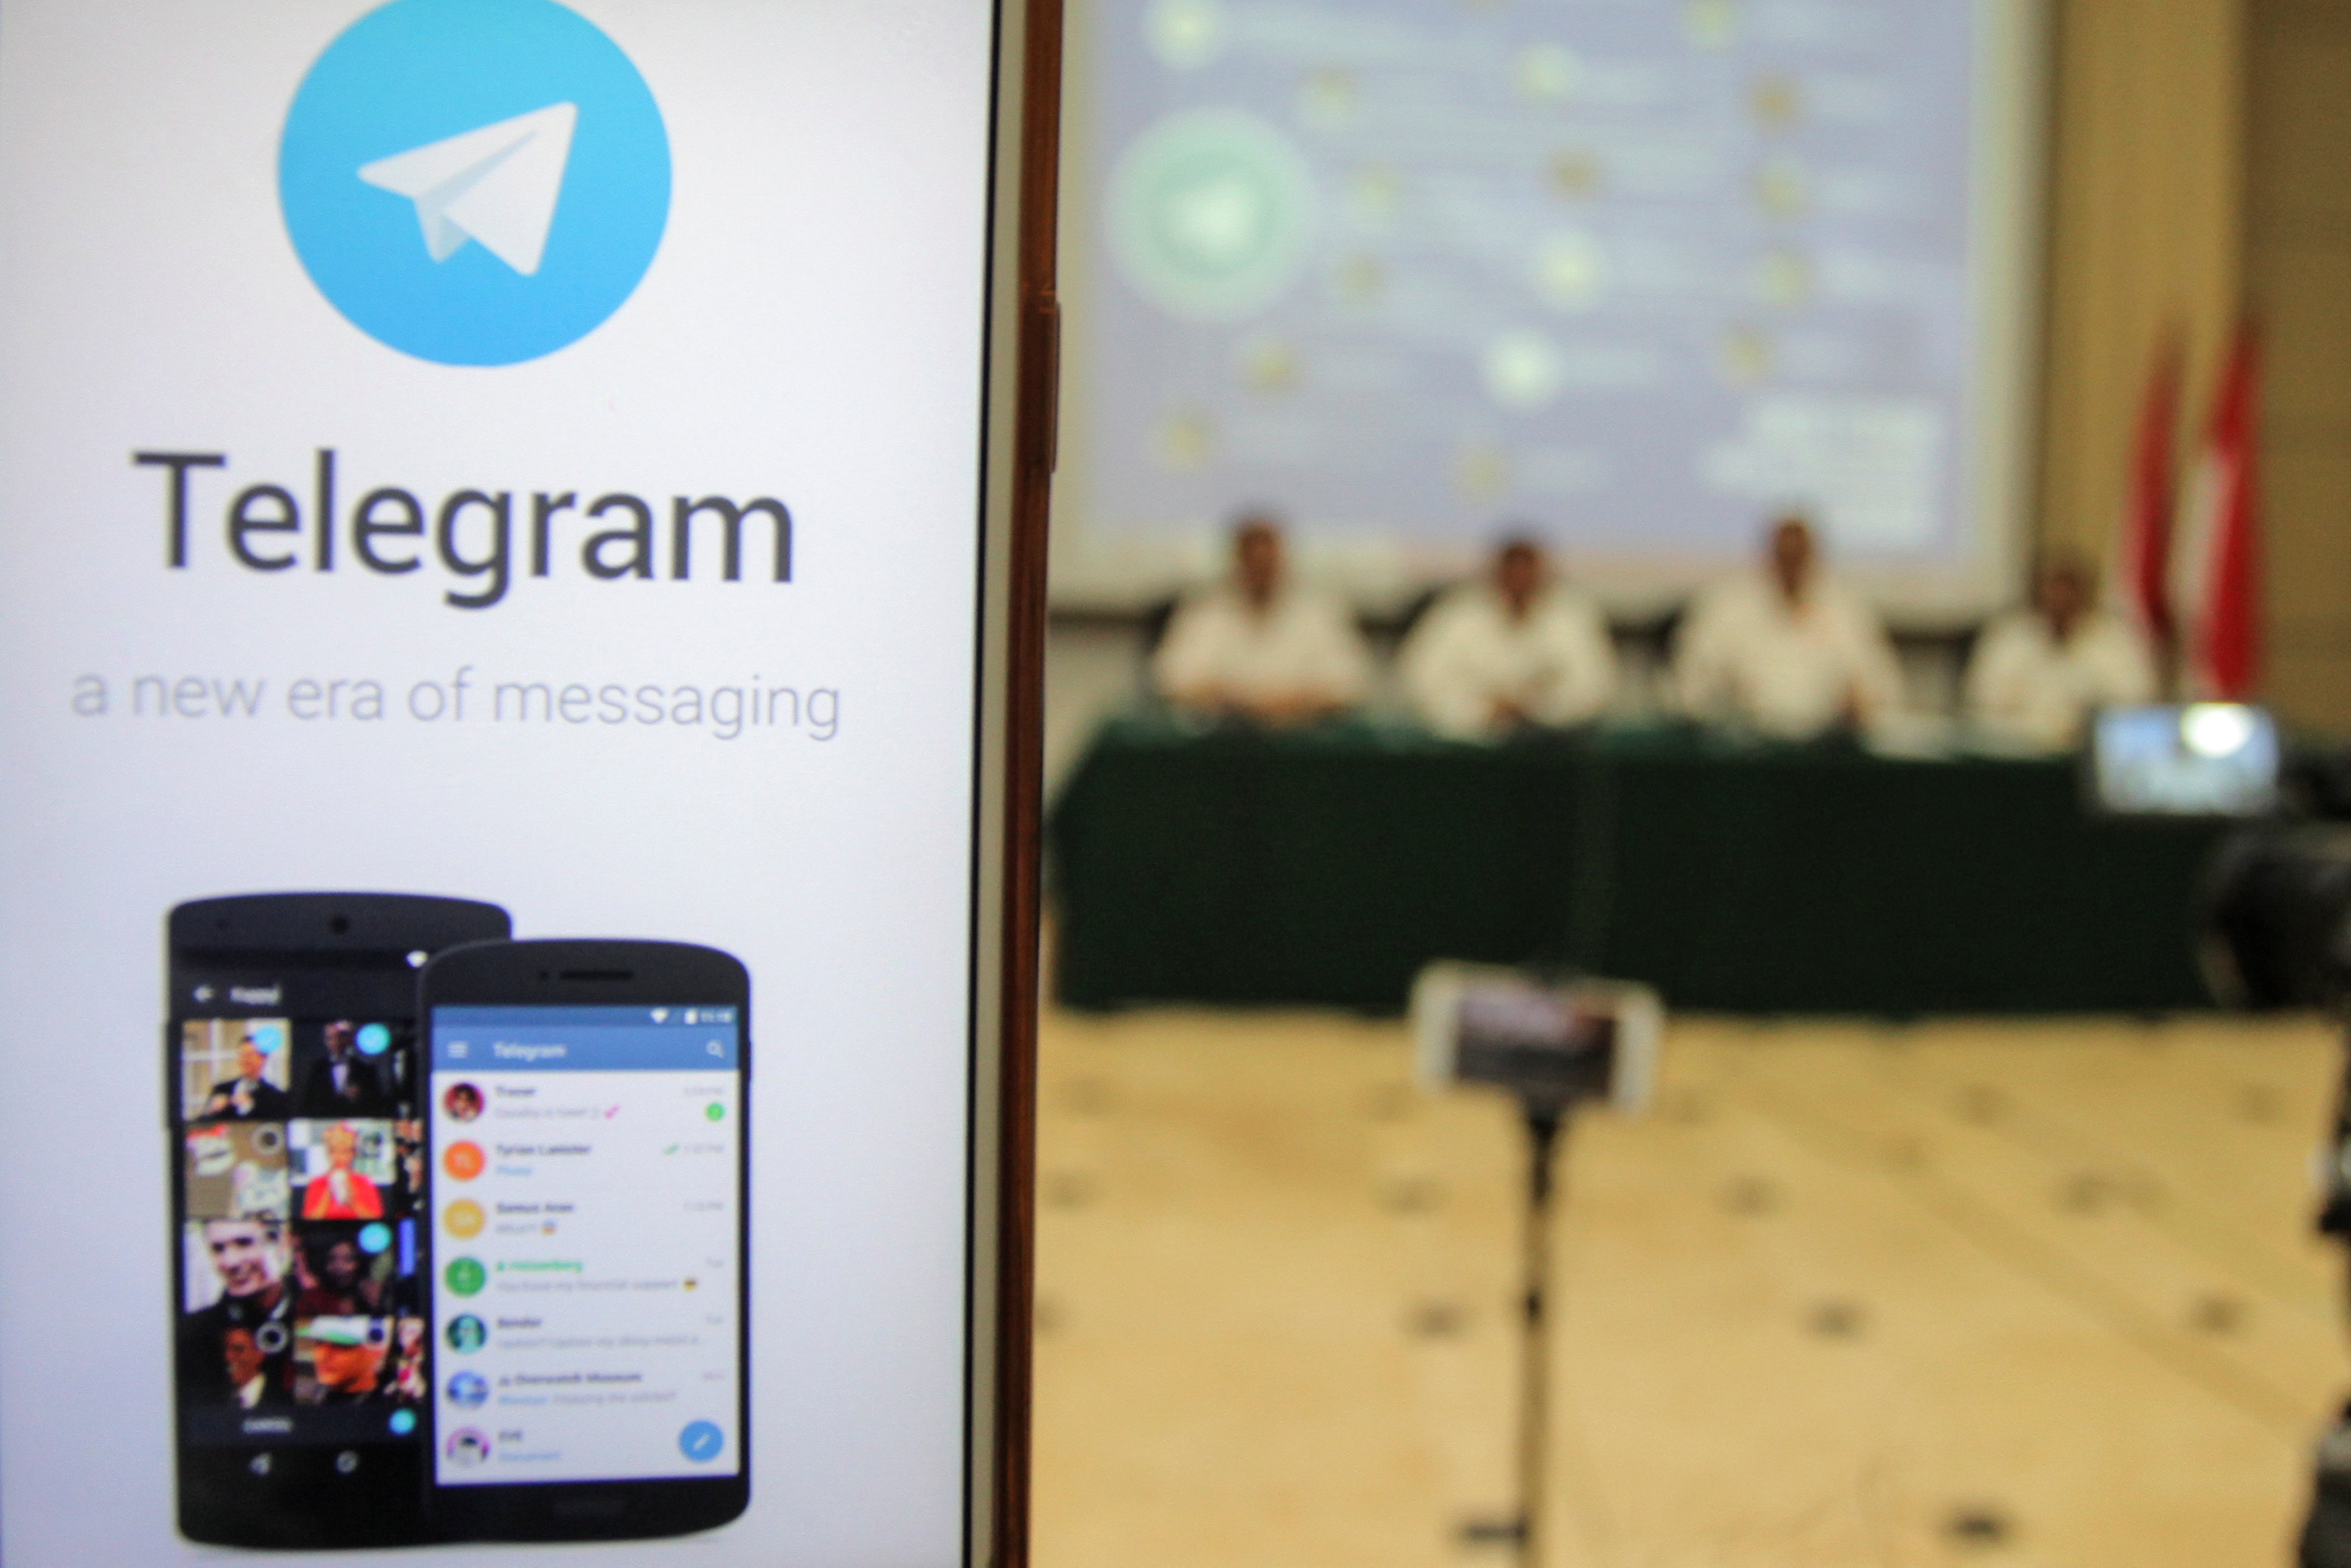 Indonesia to lift ban on Telegram message service over security